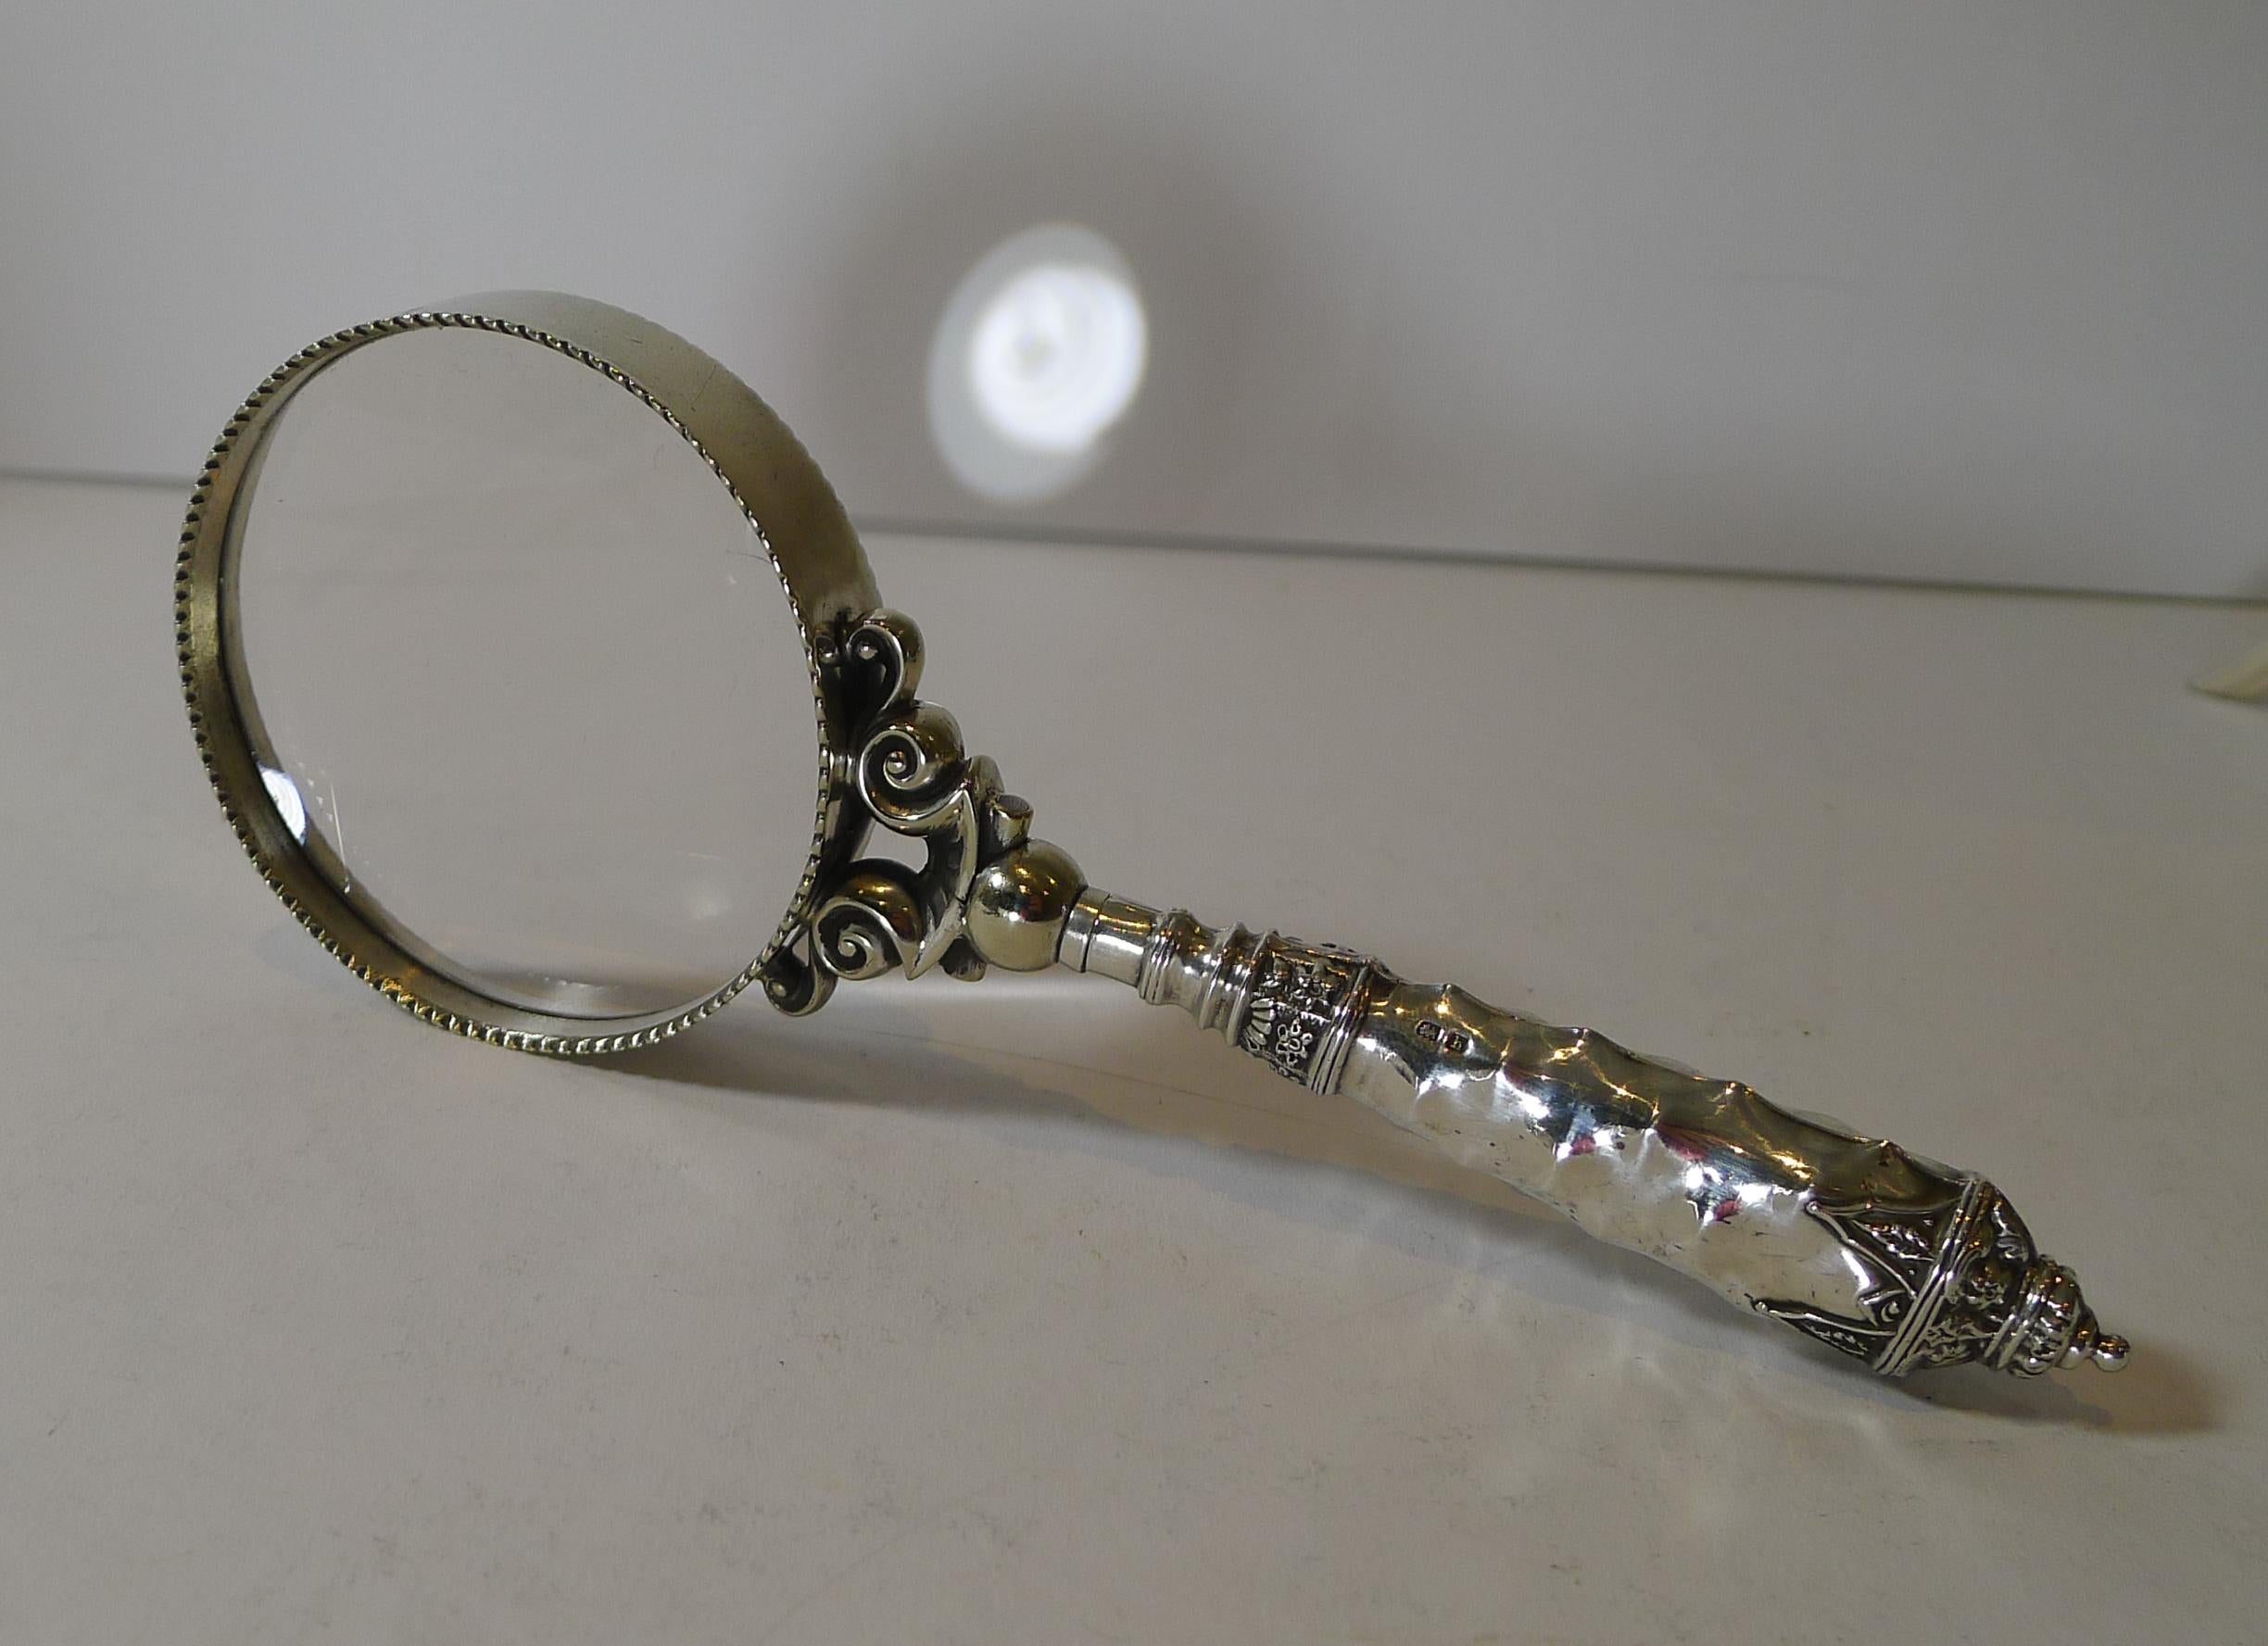 A lovely original magnifying glass with a highly decorative handle made from sterling silver fully hallmarked for Birmingham 1907 together with the maker's mark for the well renowned silversmith, Crisford and Norris.

The glass is original